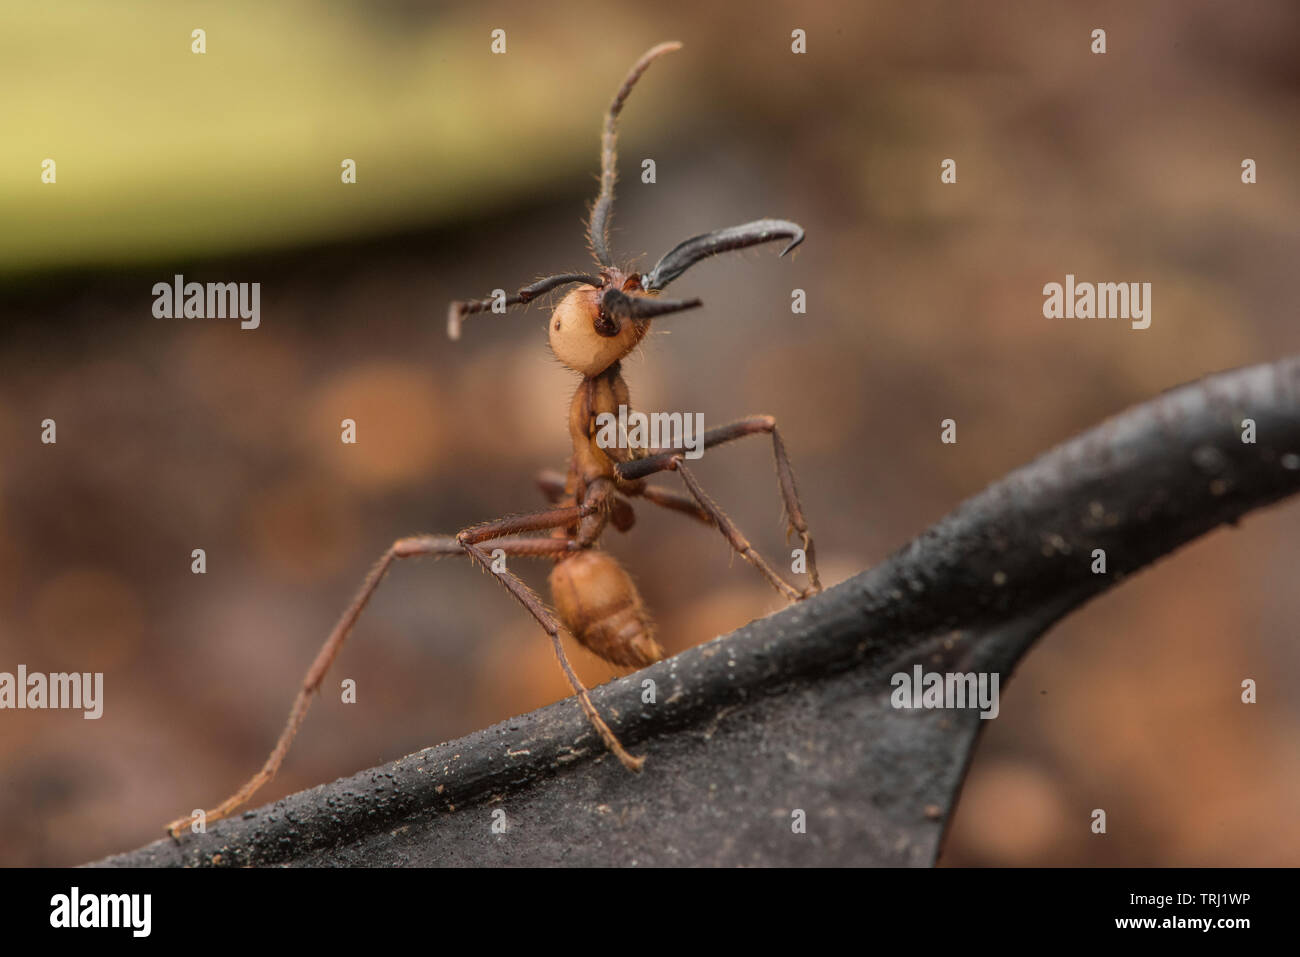 Army ants (Eciton burchellii) swarm across the forest floor, large soldier ants can be distinguished by their huge mandibles. Stock Photo